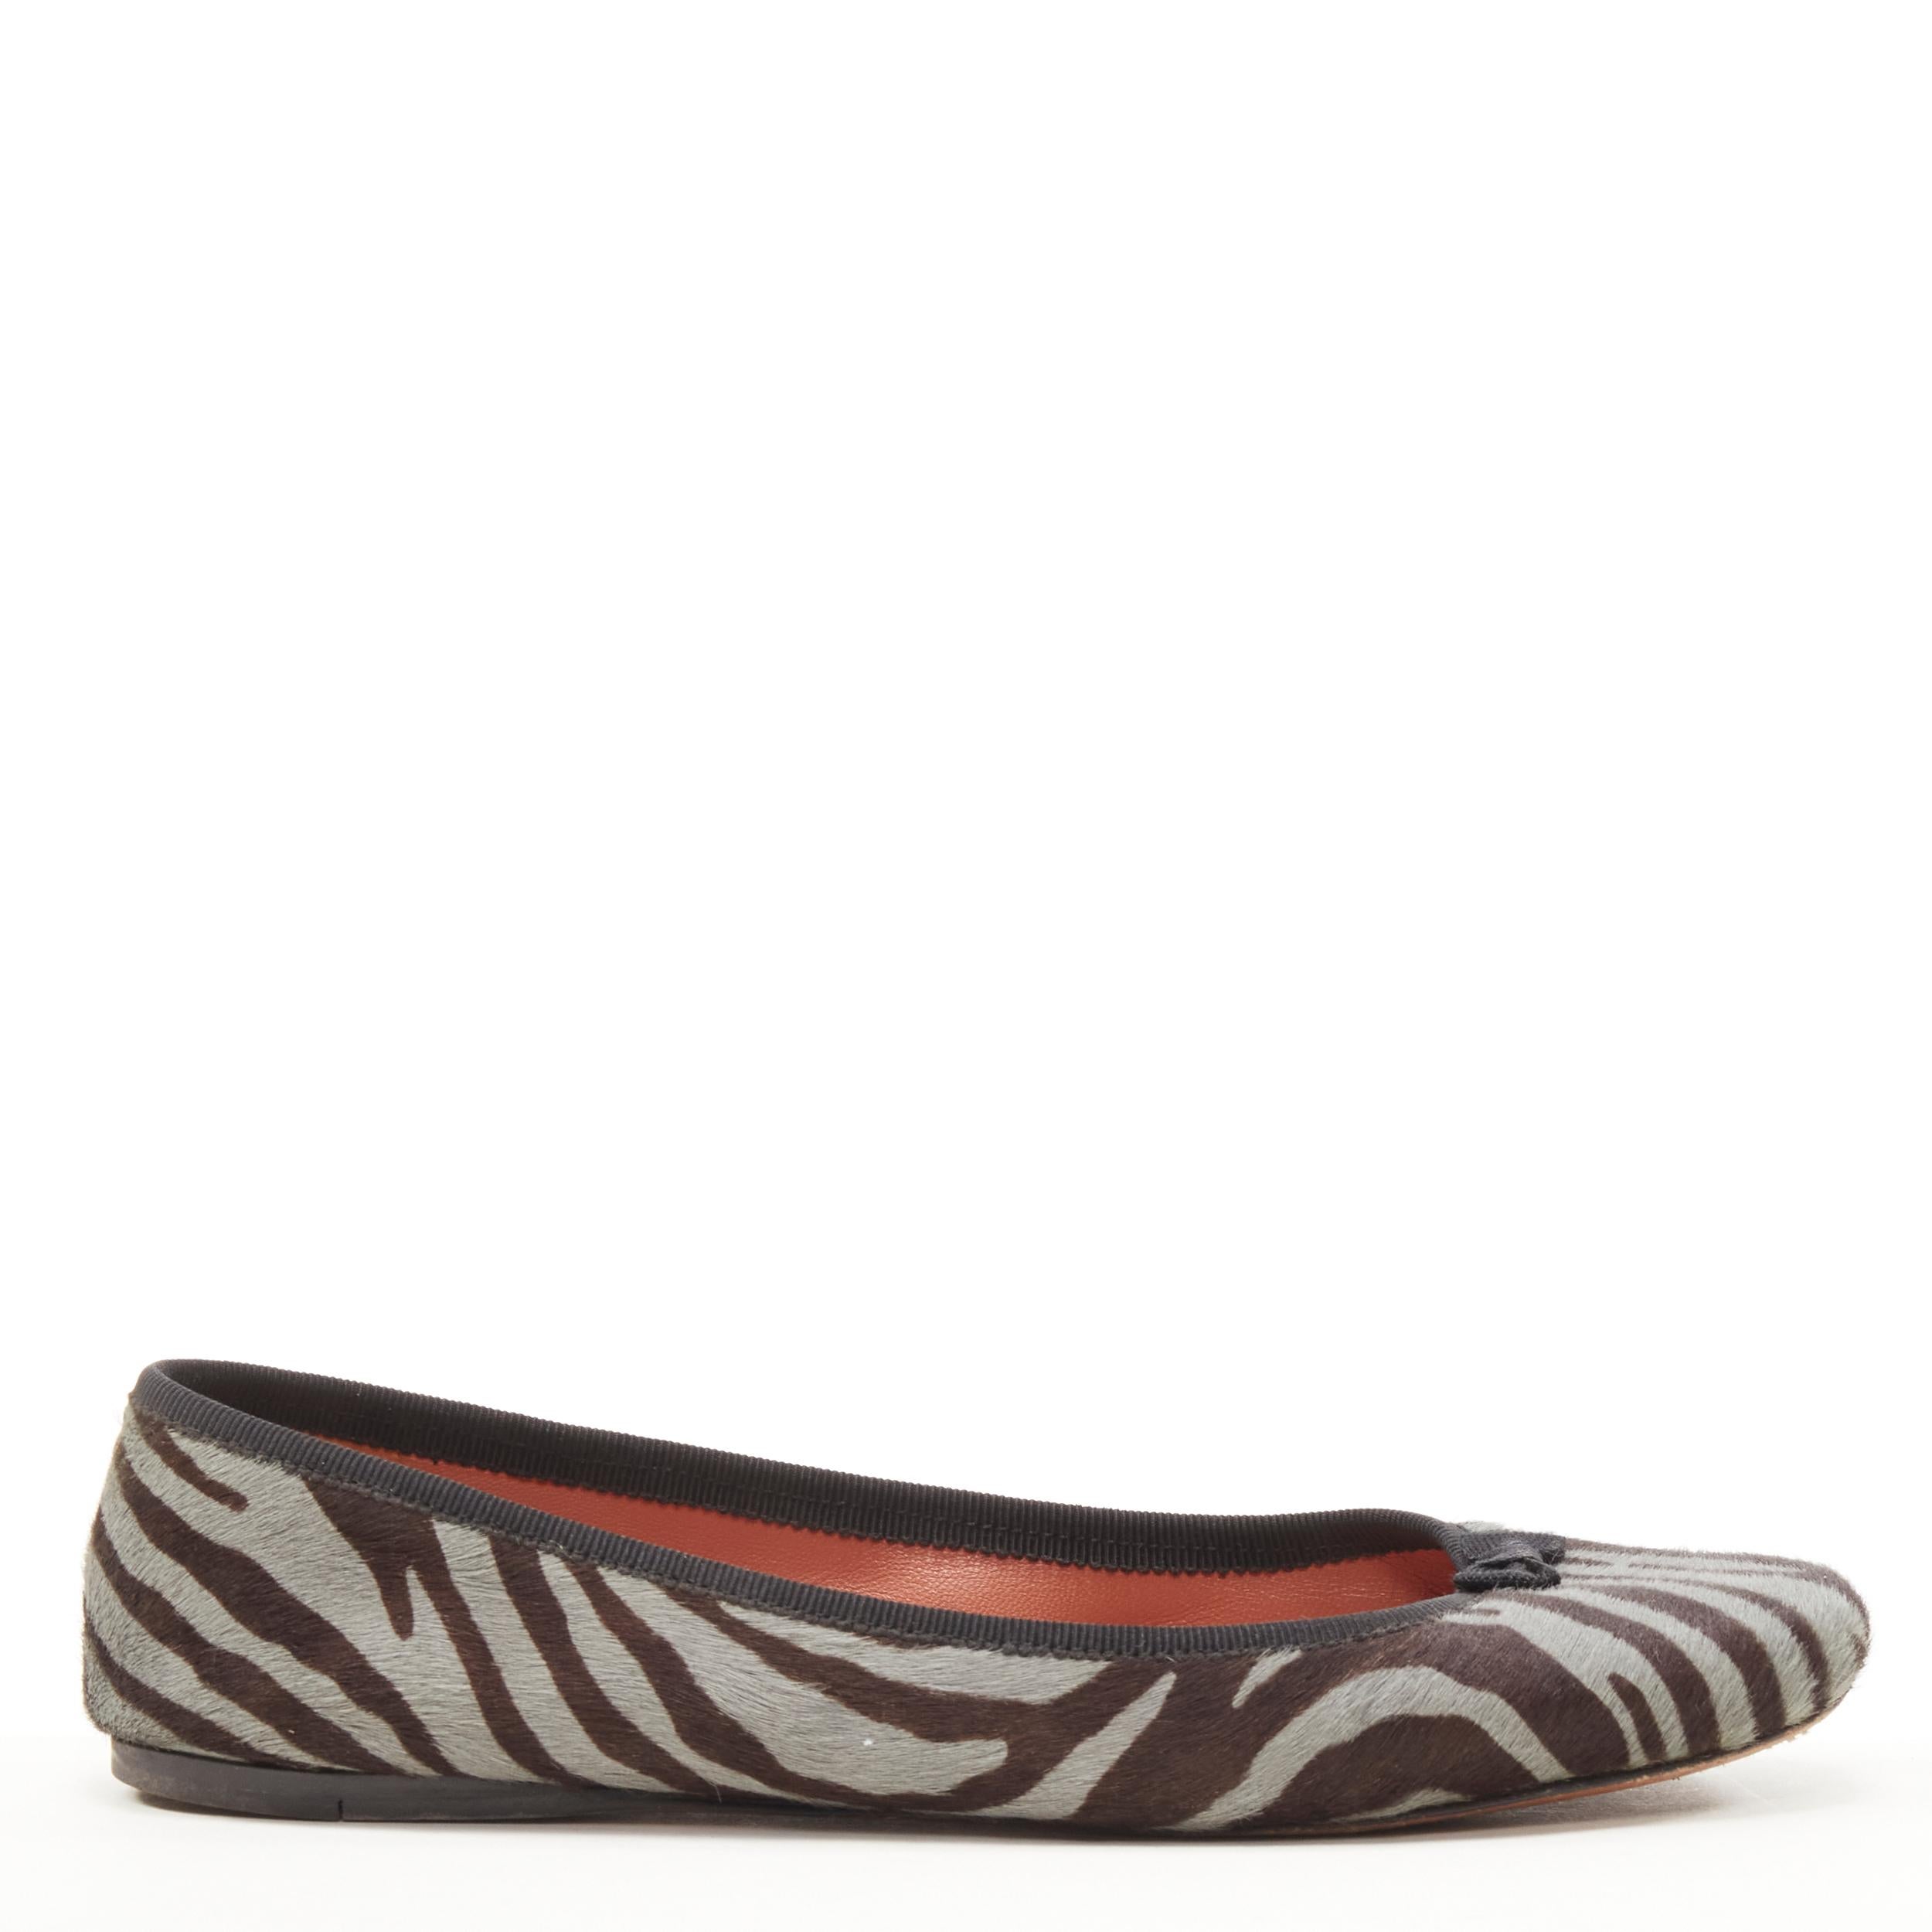 ALAIA grey zebra stripe calf hair bow trim ballerina flats EU37.5 
Reference: SNKO/A00186 
Brand: Alaia 
Material: Calf hair 
Color: Grey 
Pattern: Zebra 
Made in: Italy 

CONDITION: 
Condition: Good, this item was pre-owned and is in good